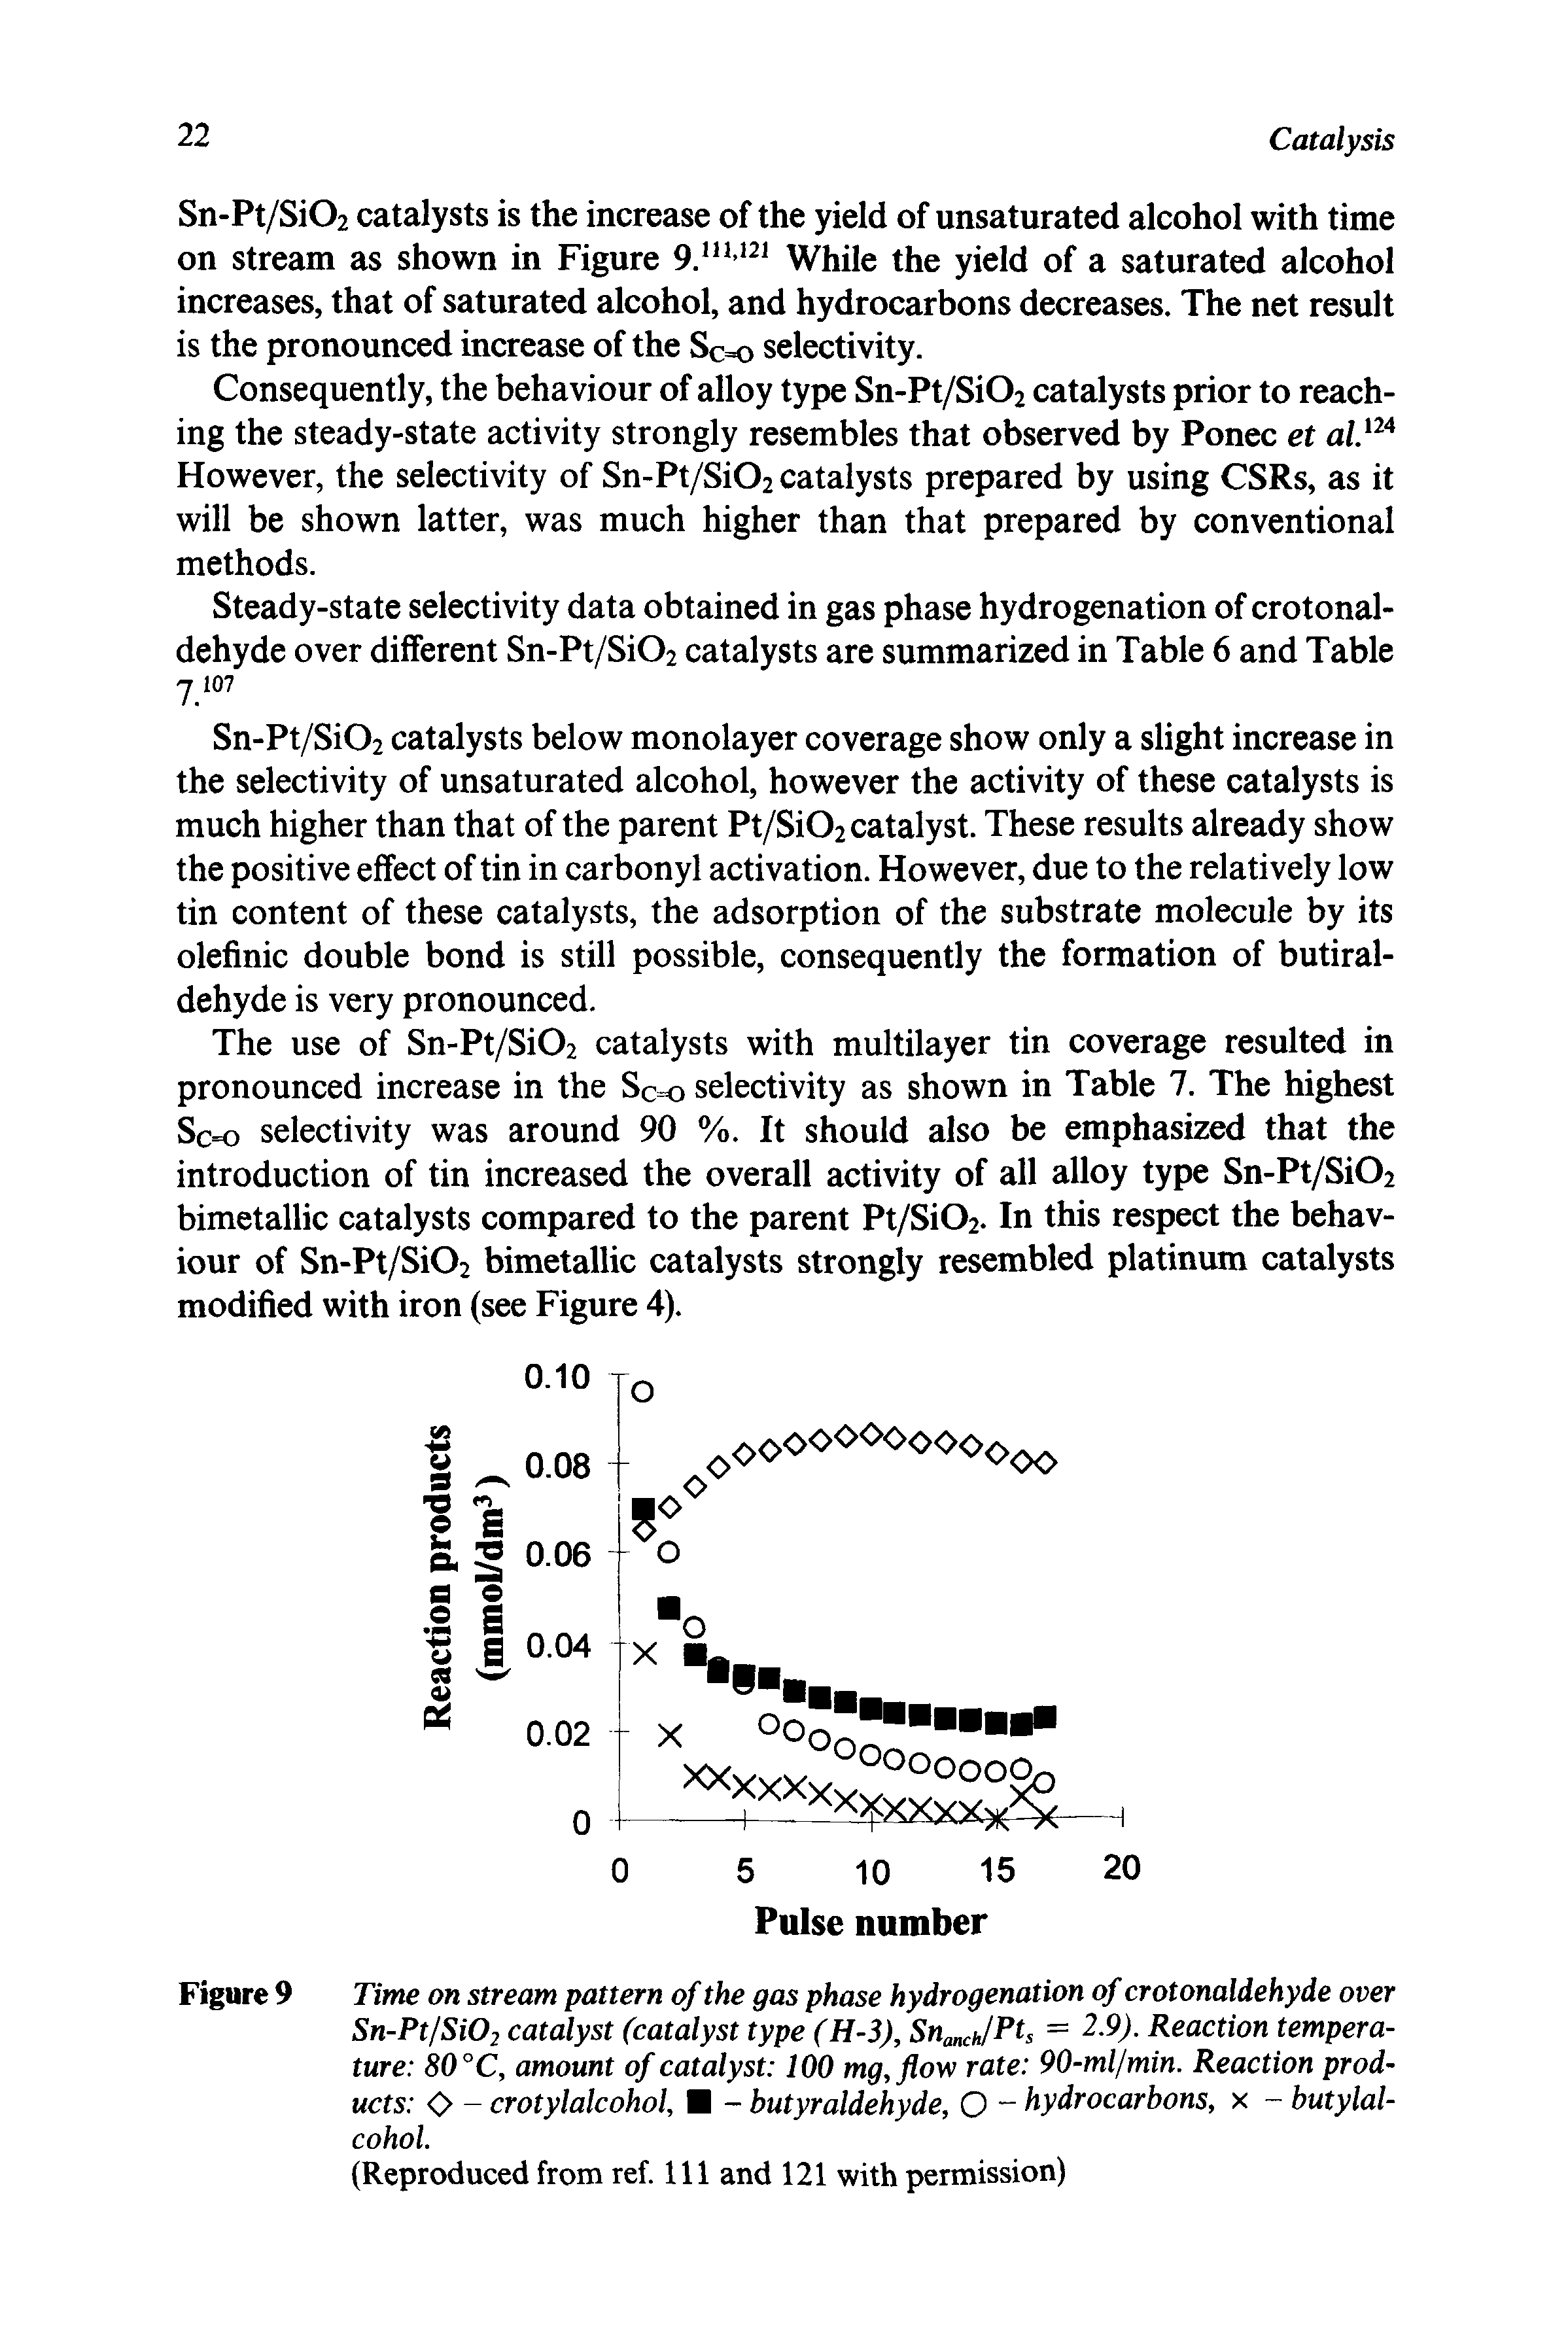 Figure 9 Time on stream pattern of the gas phase hydrogenation of crotonaldehyde over Sn-PtlSi02 catalyst (catalyst type (H-3), Sna ctJP s — Reaction temperature 80 °C, amount of catalyst 100 mg, flow rate 90-ml/min. Reaction products O - crotylalcohol, - butyraldehyde, O - hydrocarbons, x - butylal-cohol.